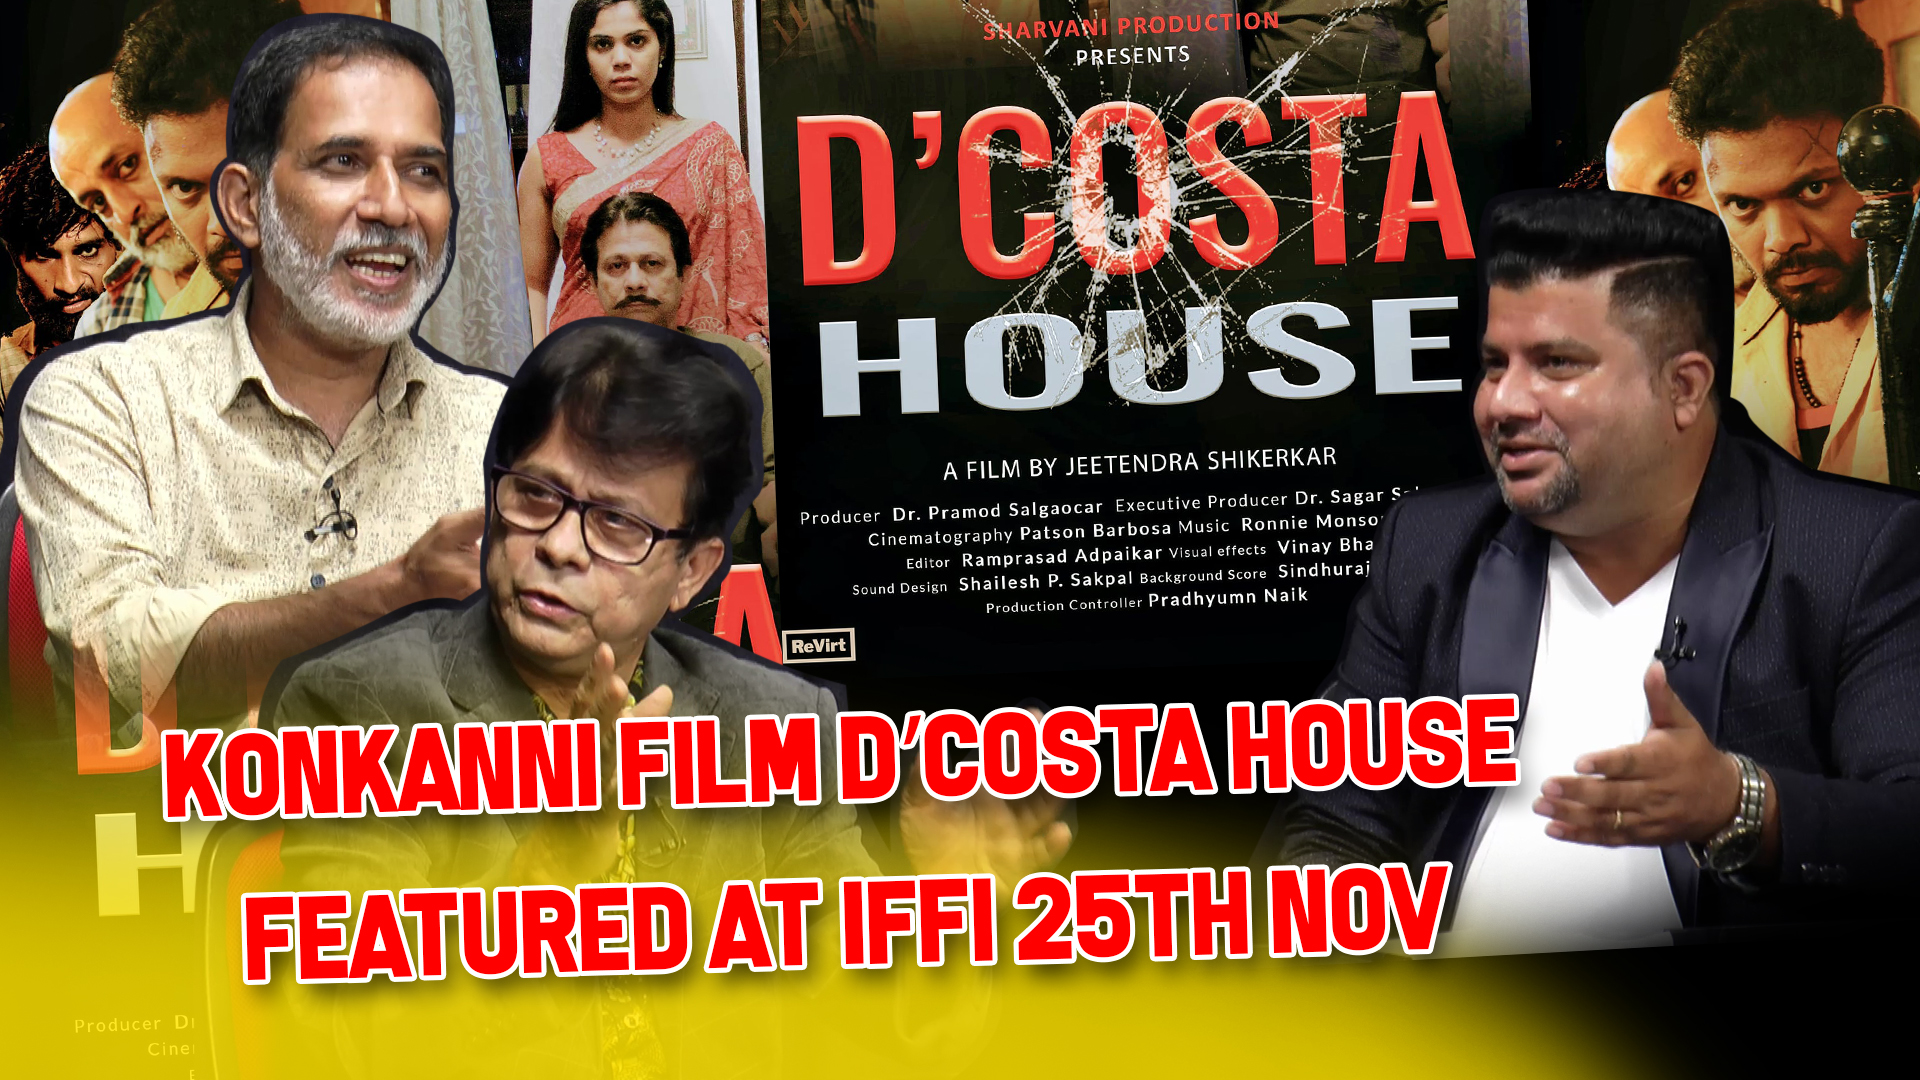 STORY BEHIND THE STORY : KONKANNI FILM D’COSTA HOUSE FEATURED AT IFFI  25TH NOV